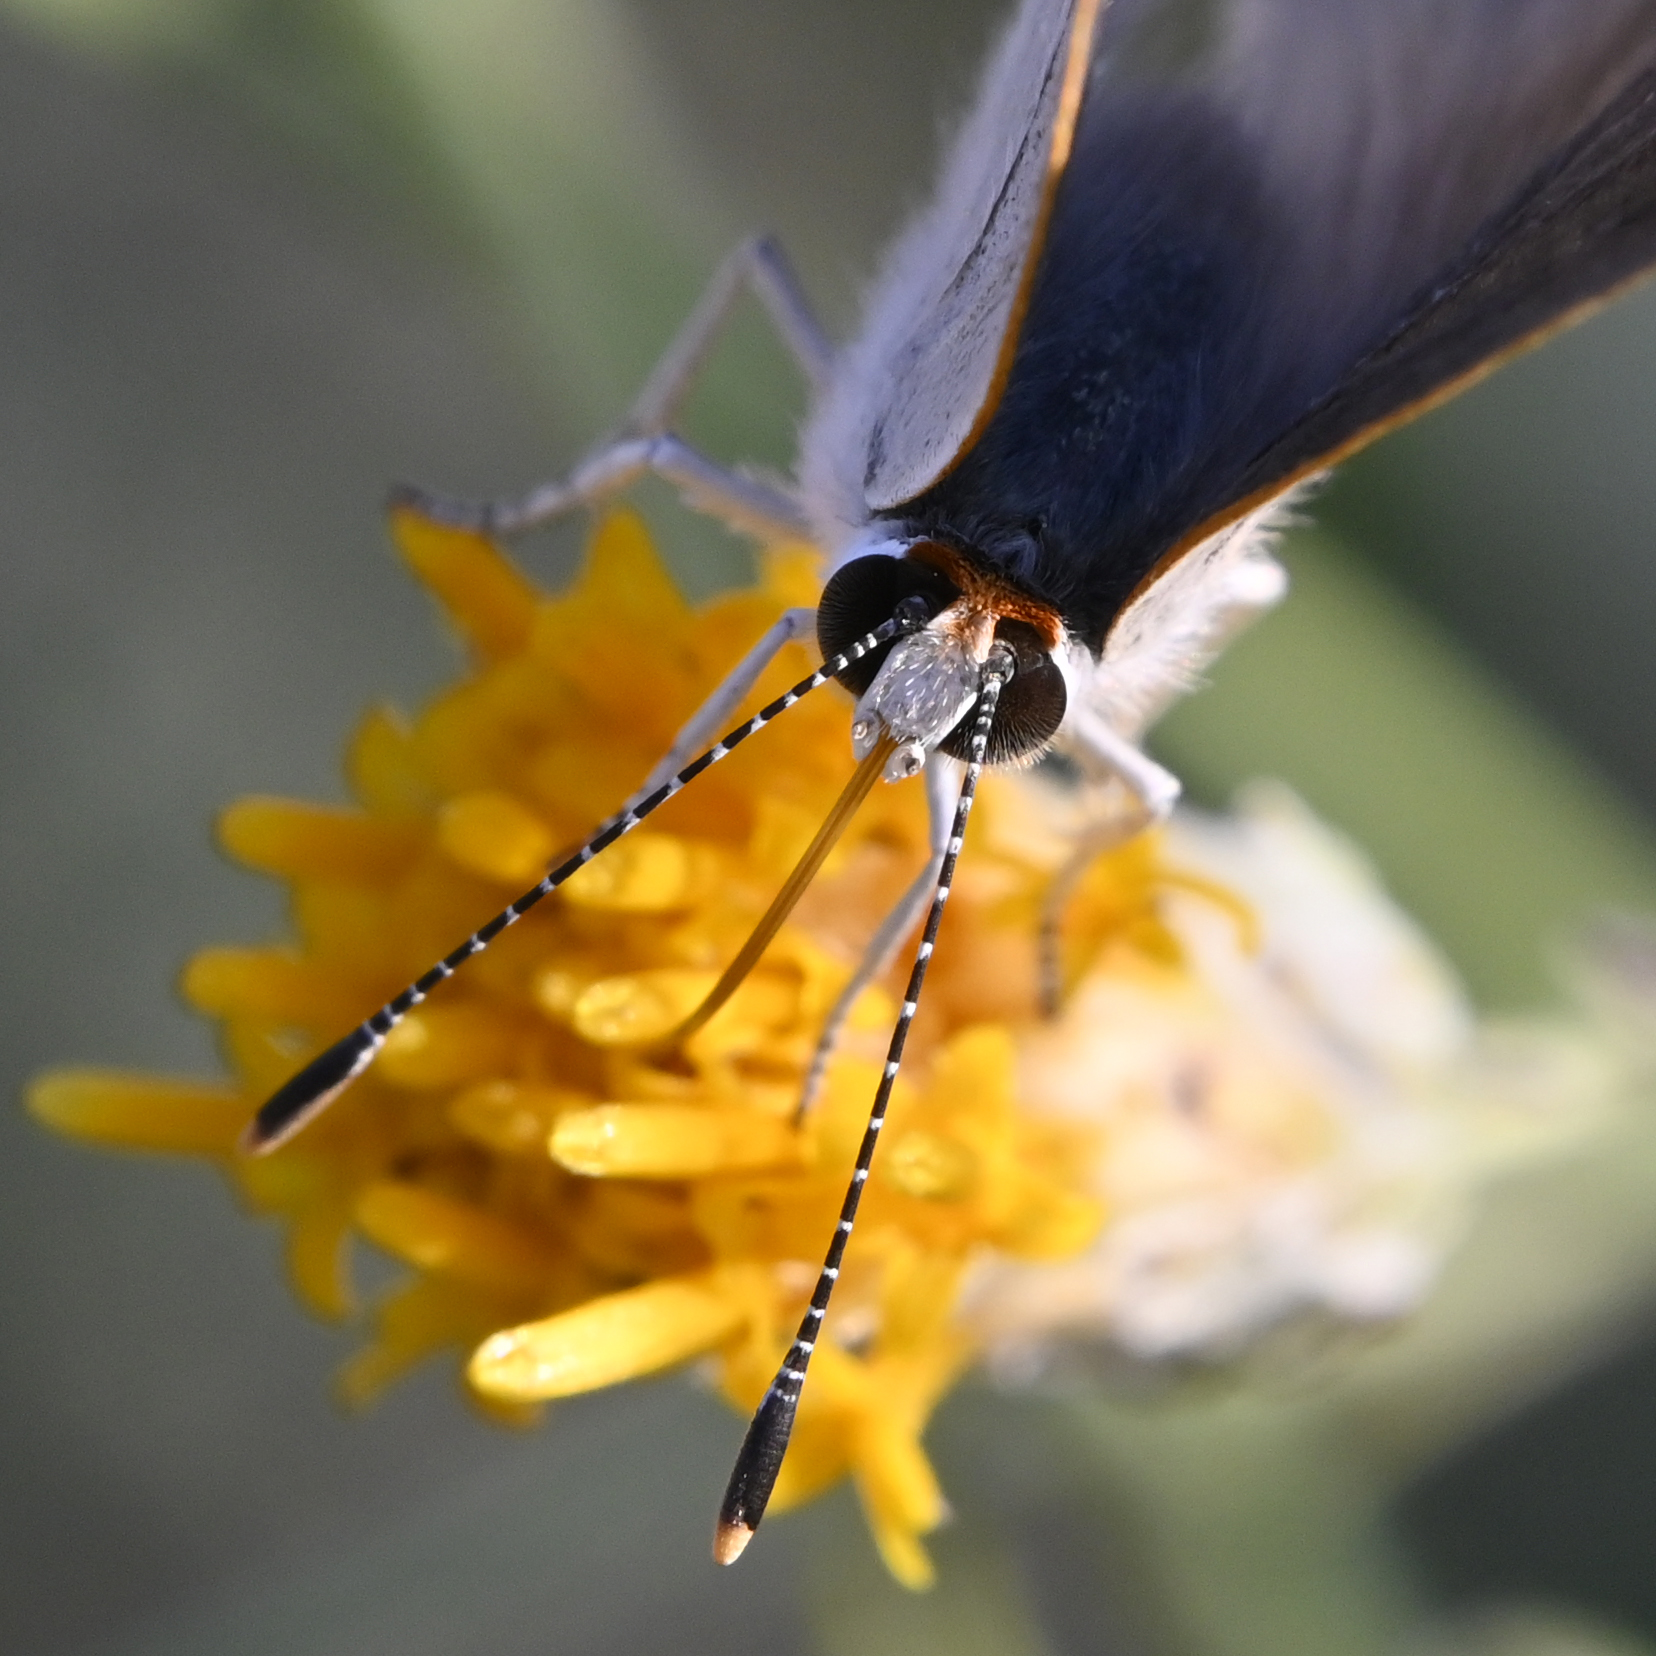 Photo by Jerry Bombardier  |  A butterfly enjoys an abundance of wildflowers in the desert after summer monsoon rains.